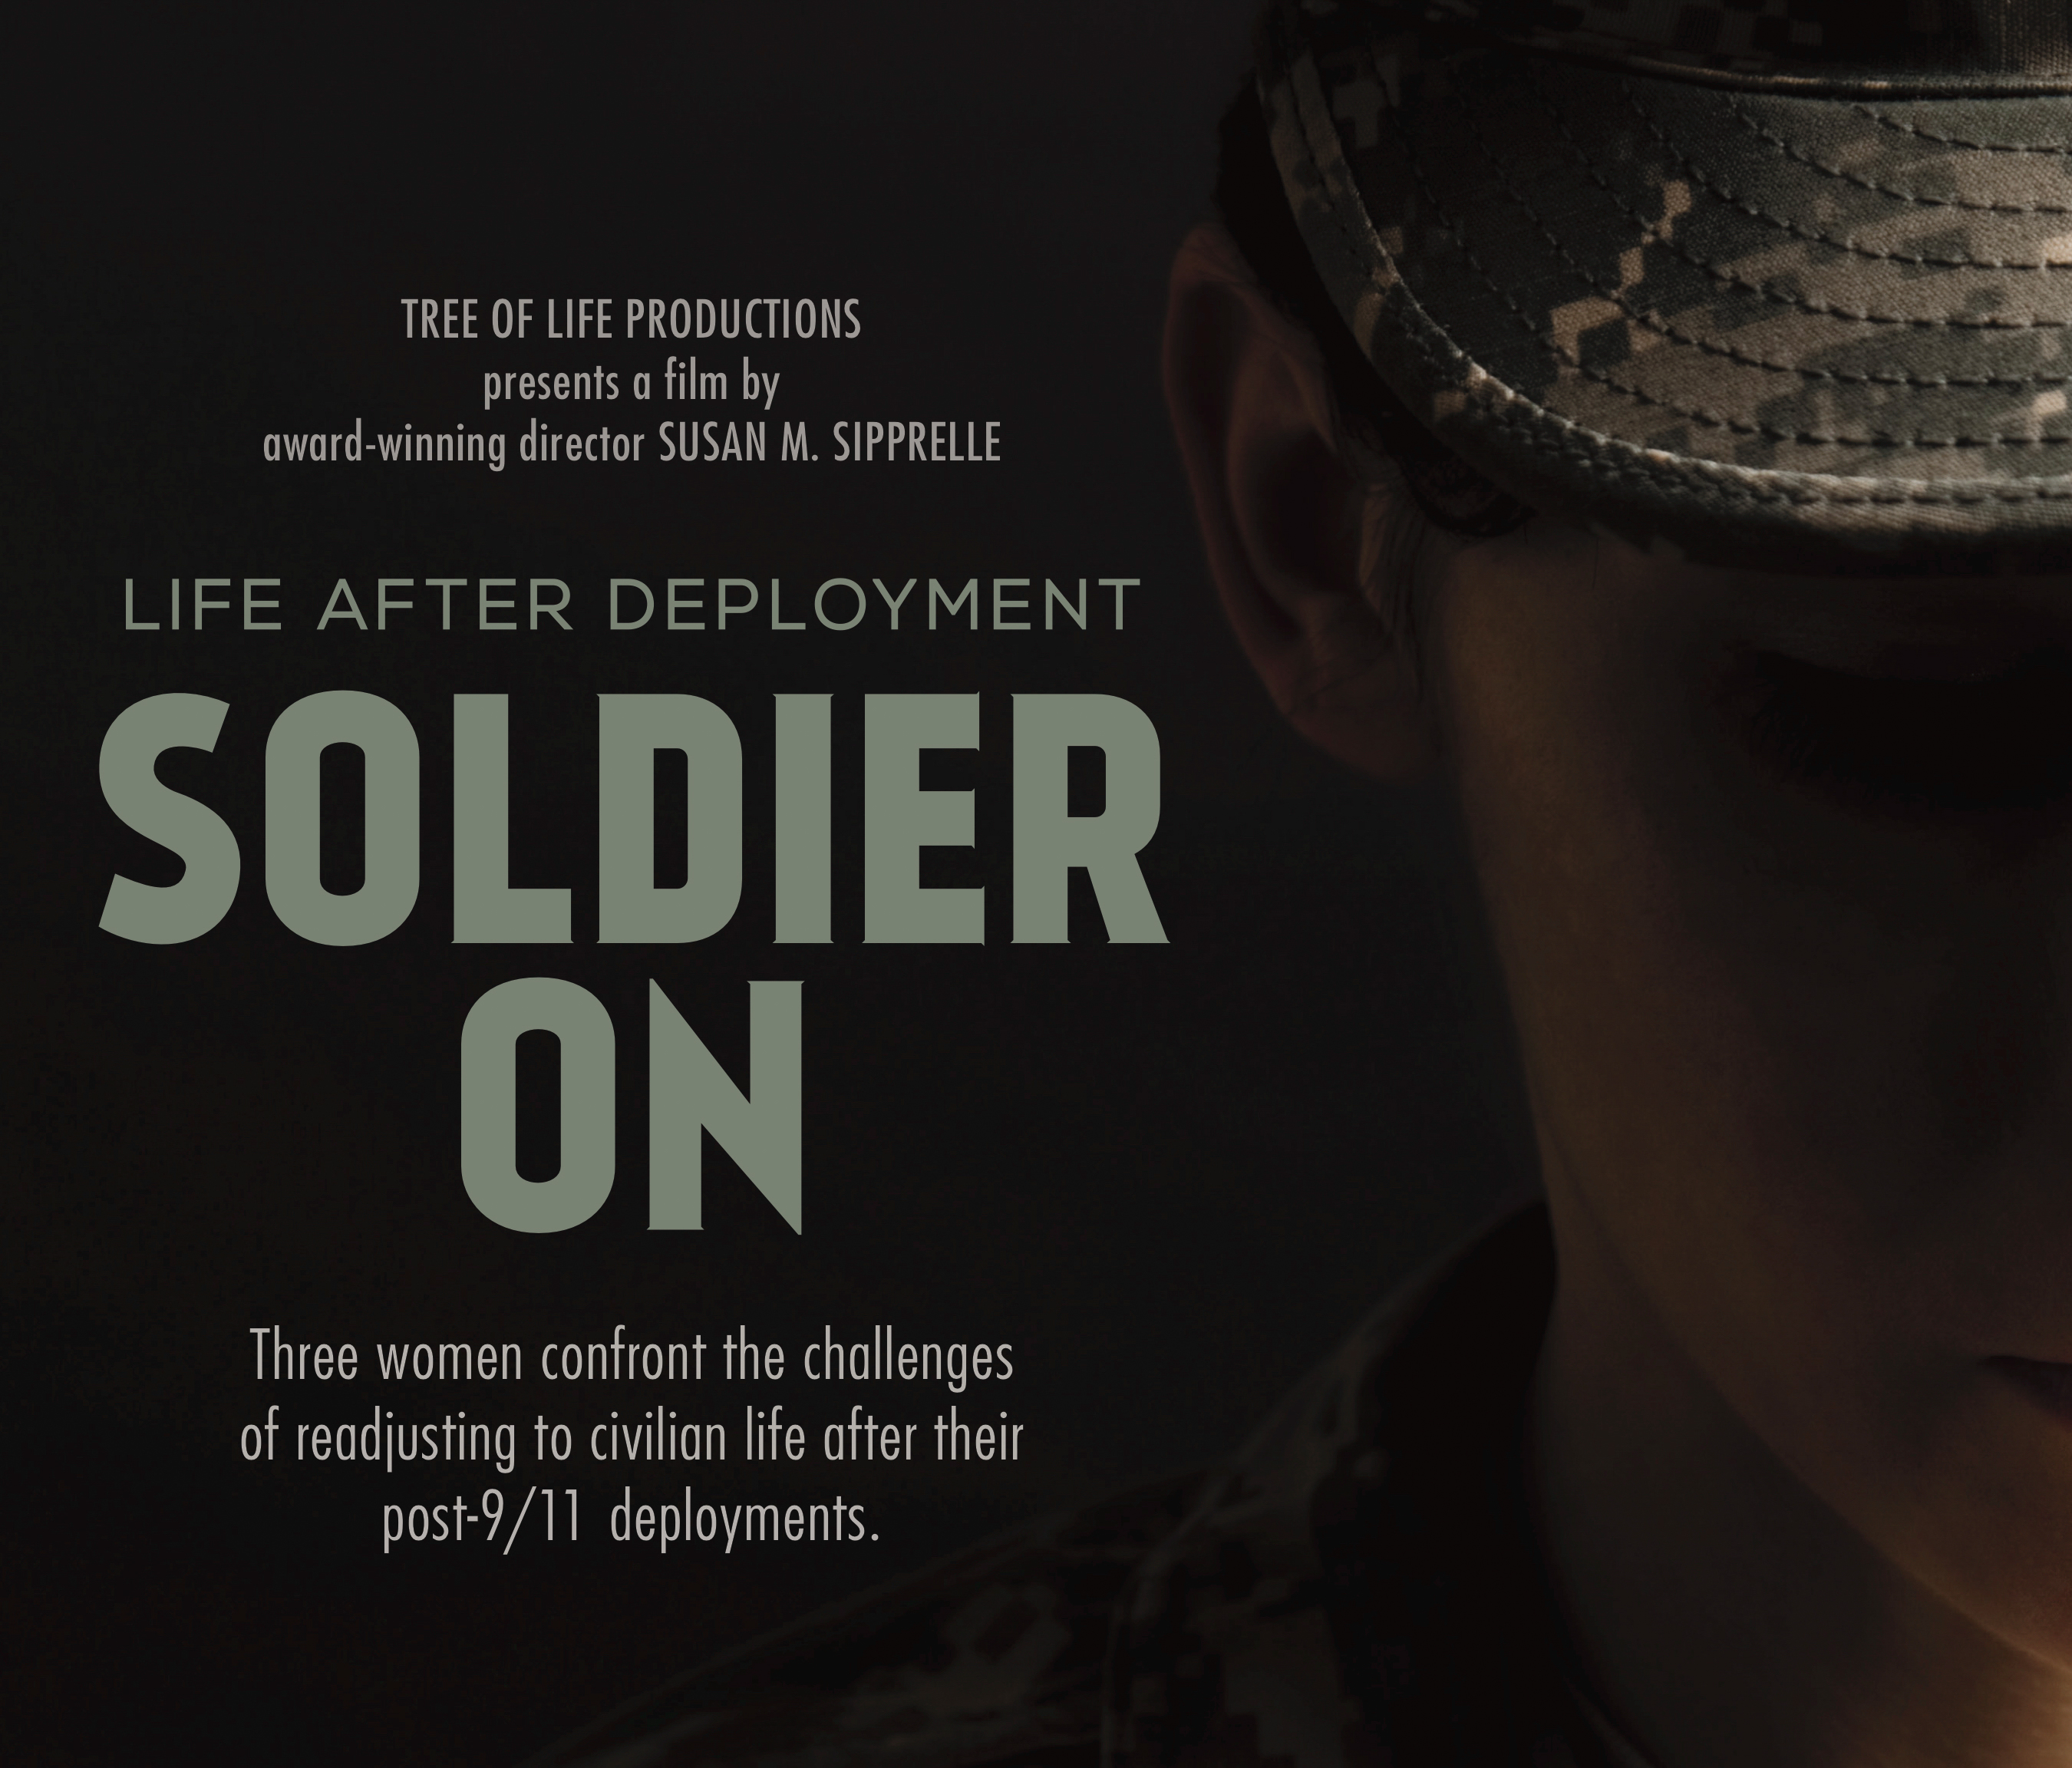 Soldier On: Life After Deployment